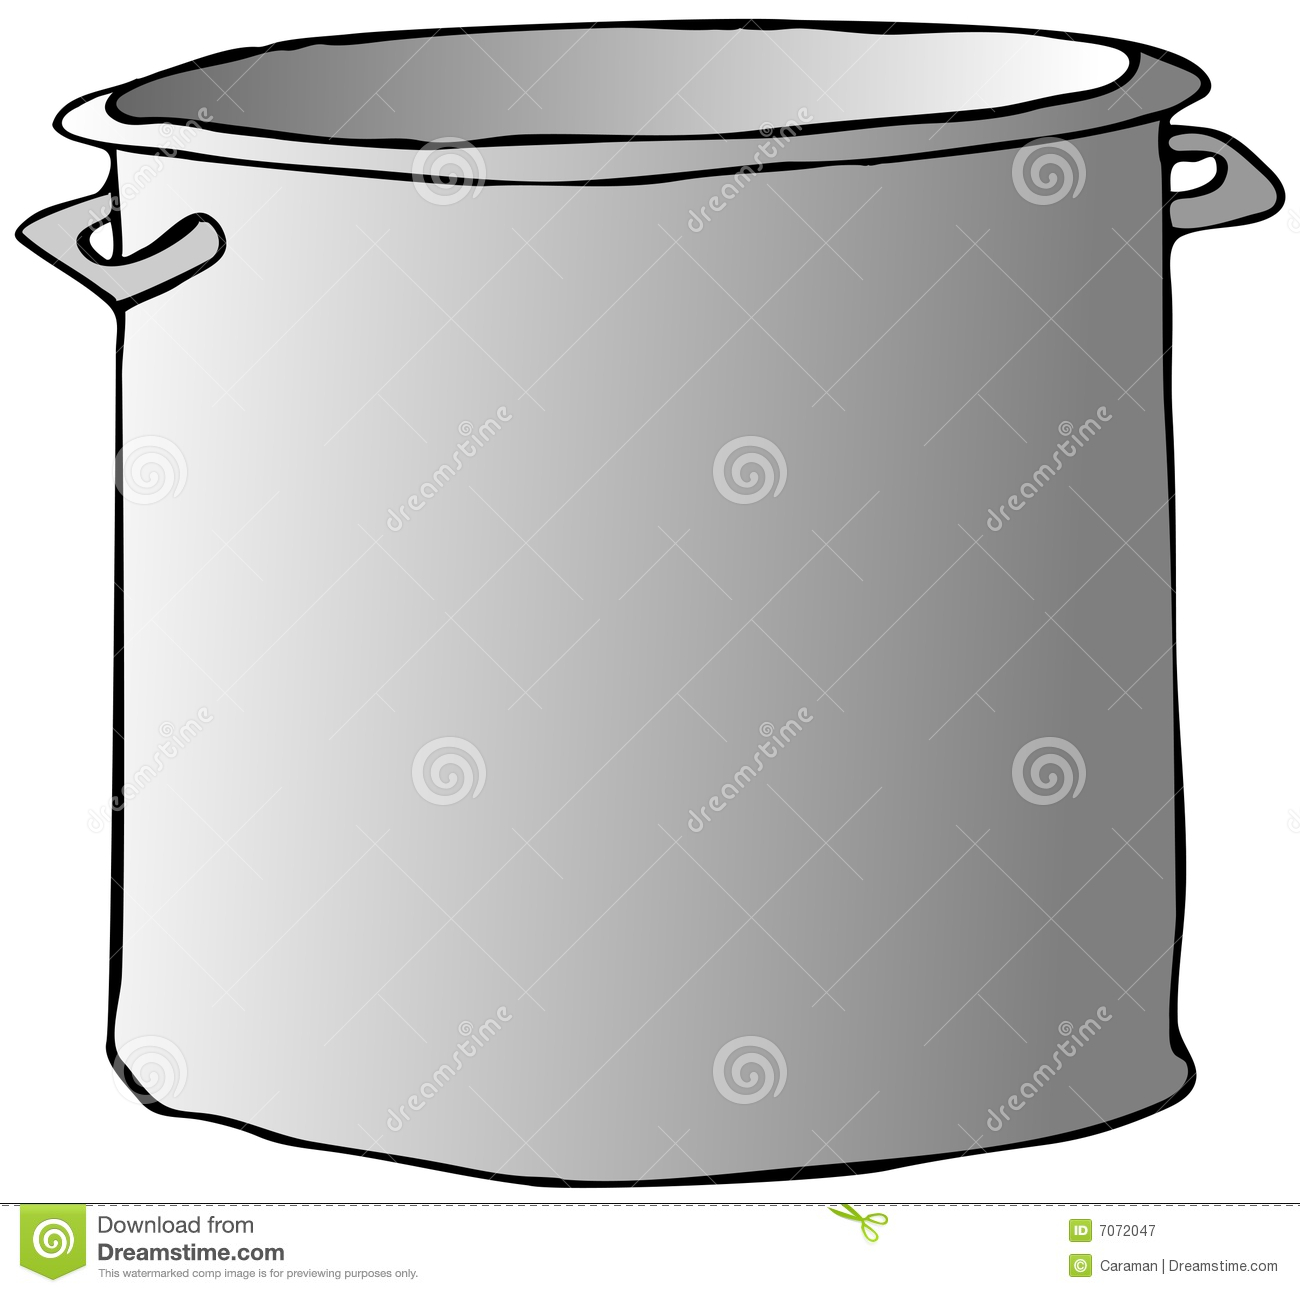 Cooking Pot Royalty Free Stock Photography   Image  7072047